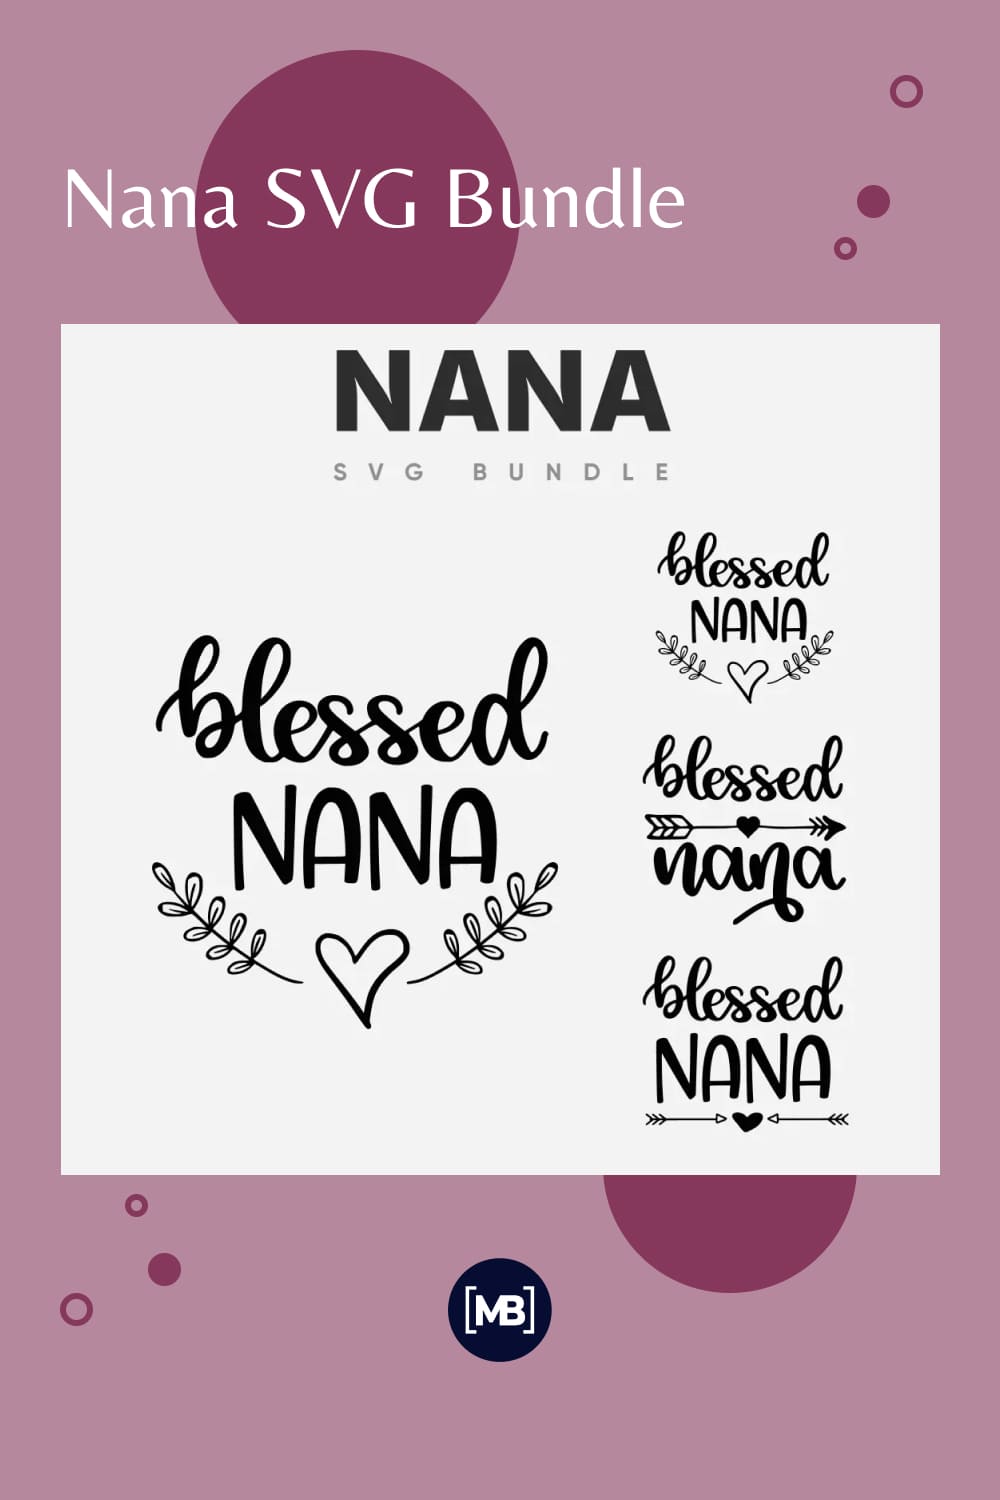 Cute signs about nana